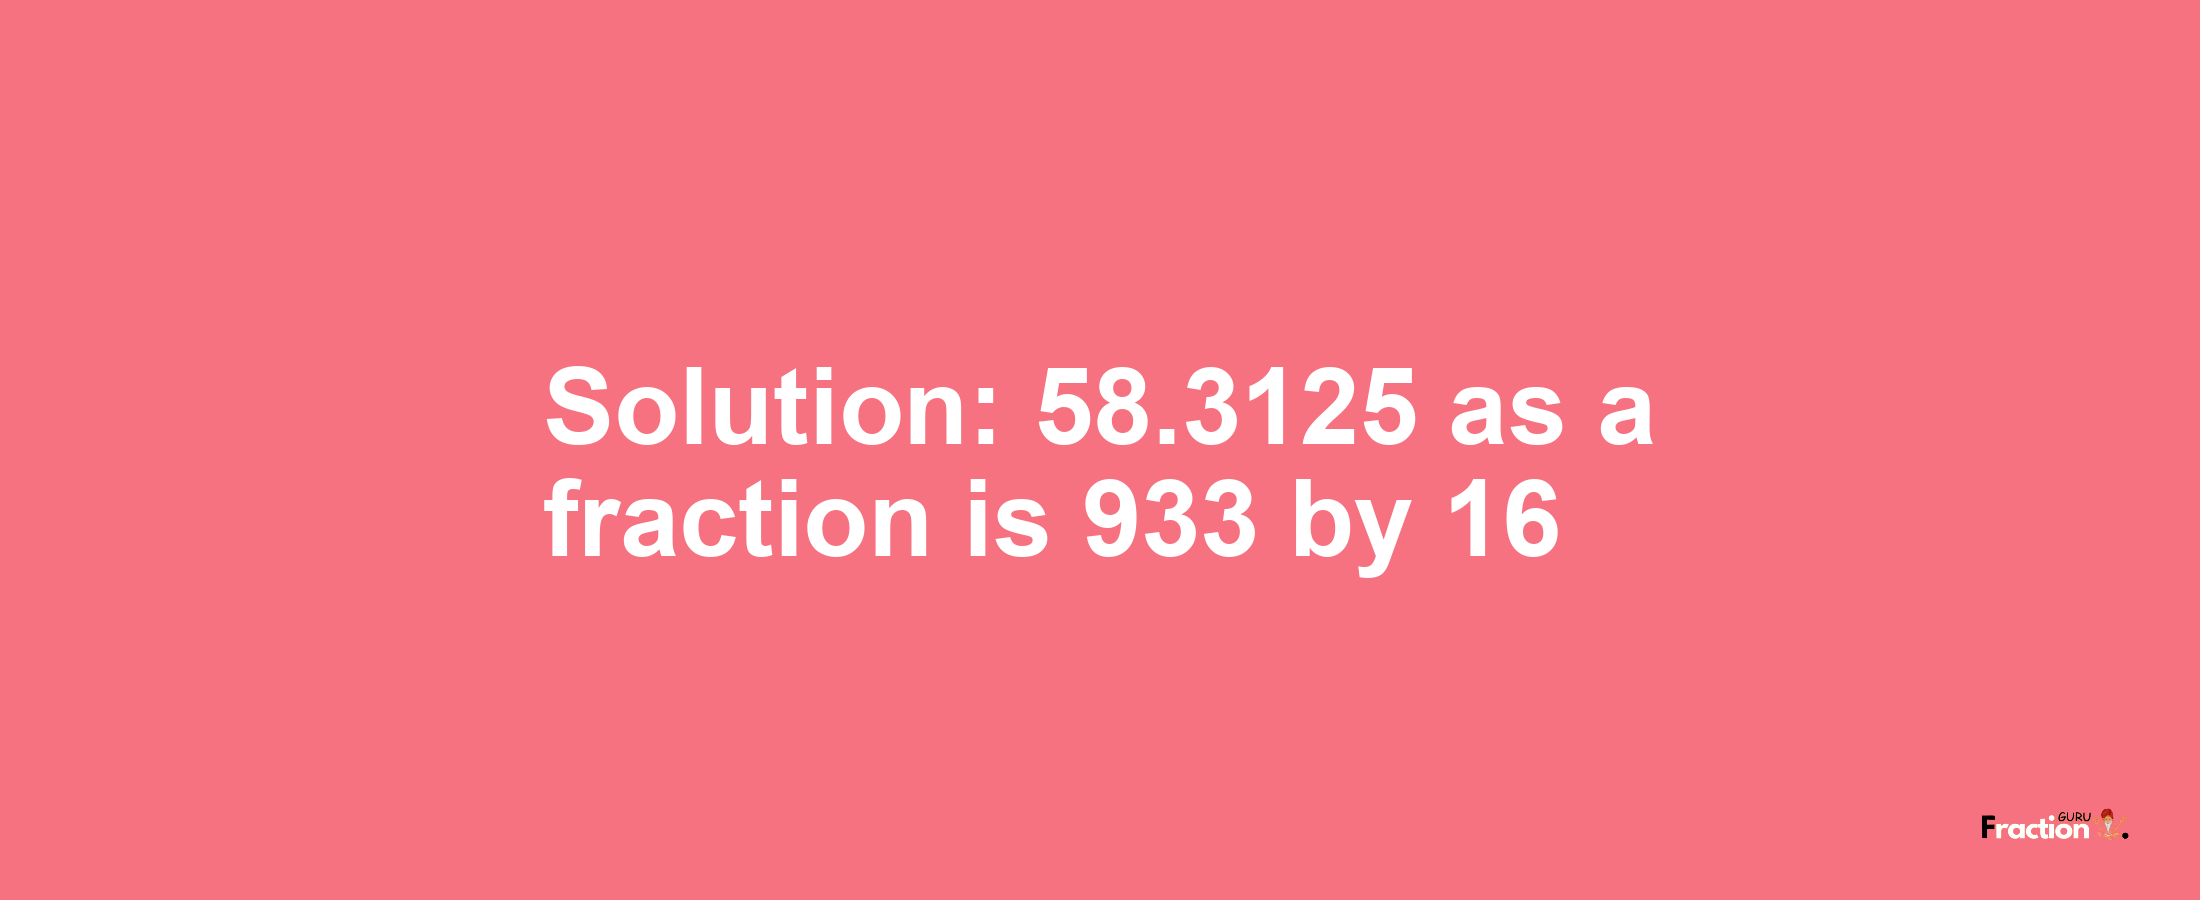 Solution:58.3125 as a fraction is 933/16